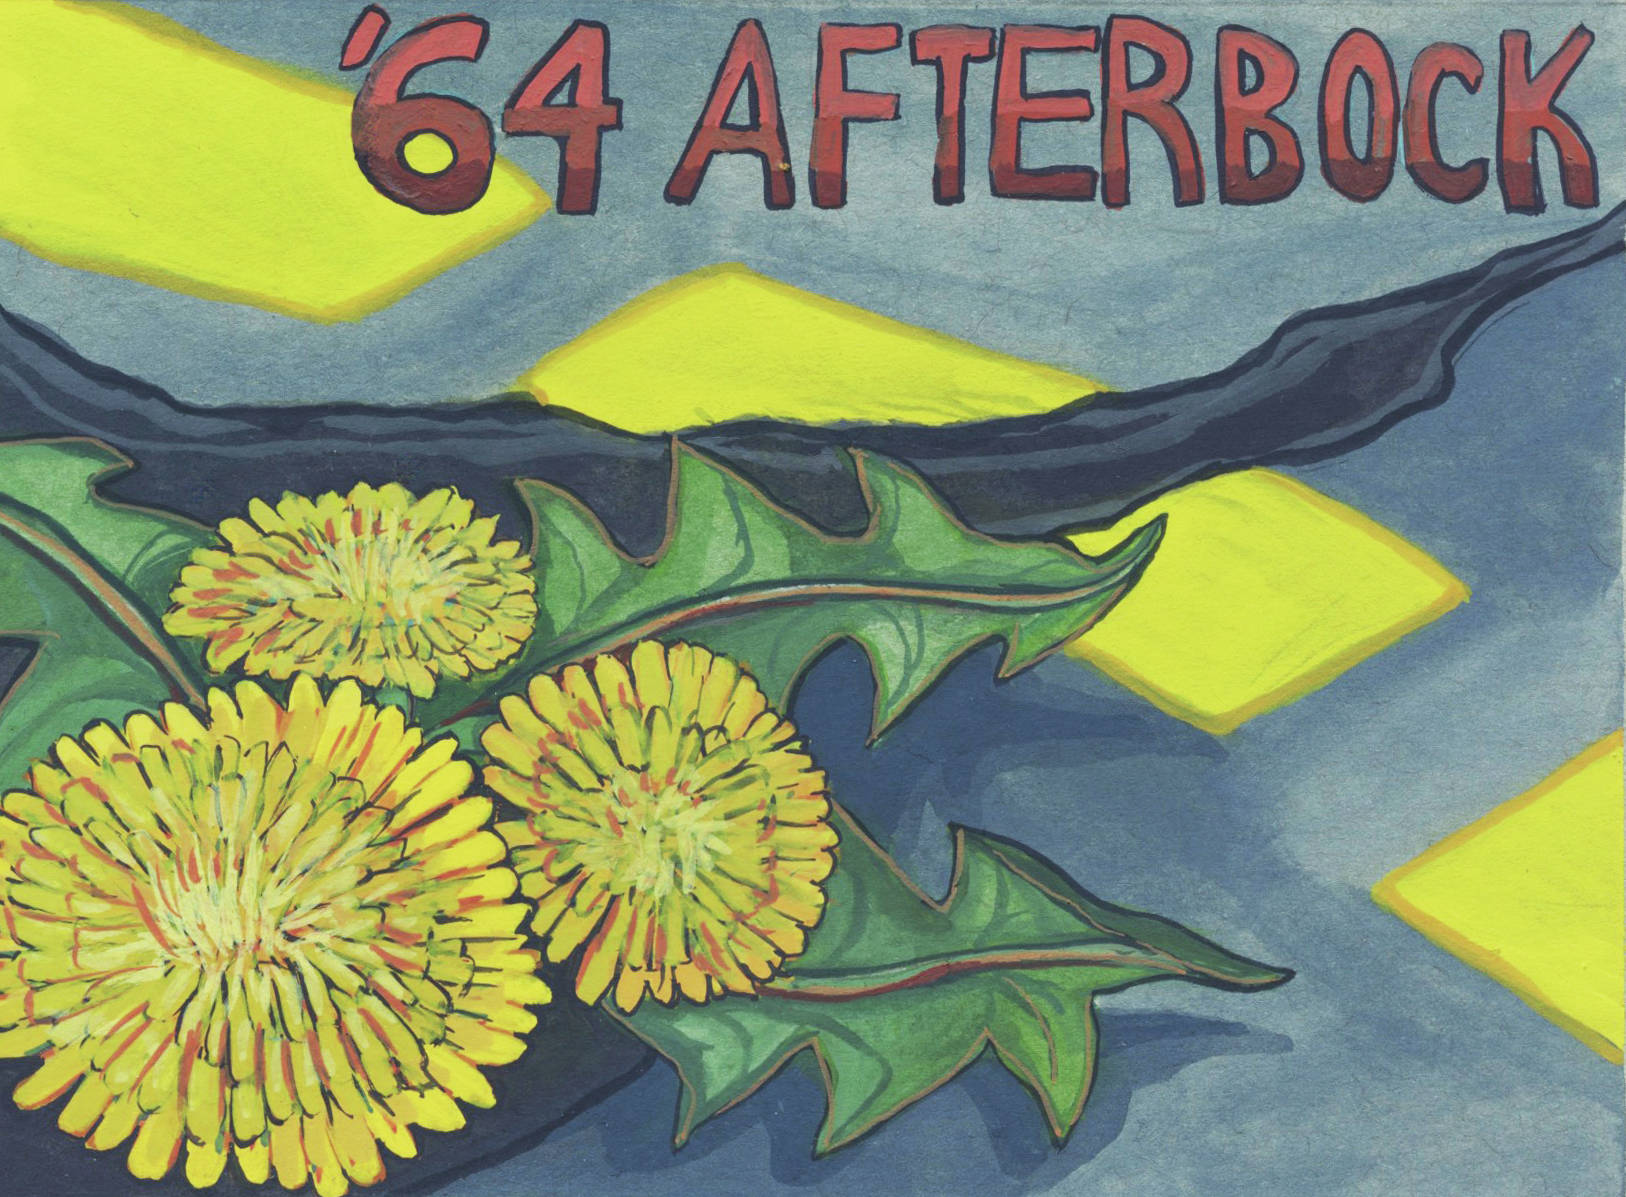 Oceana Wills’ design for Grace Ridge Brewery’s ‘64 Afterbock beer label contest to commemorate the 20th anniversary of the Kachemak Bay National Estuarine Research Reserve (KBNERR). The designs go on exhibit and the winning label will be revealed Friday, Feb. 5, 2021, at the brewery in Homer, Alaska. (Photo courtesy of Grace Ridge Brewery)